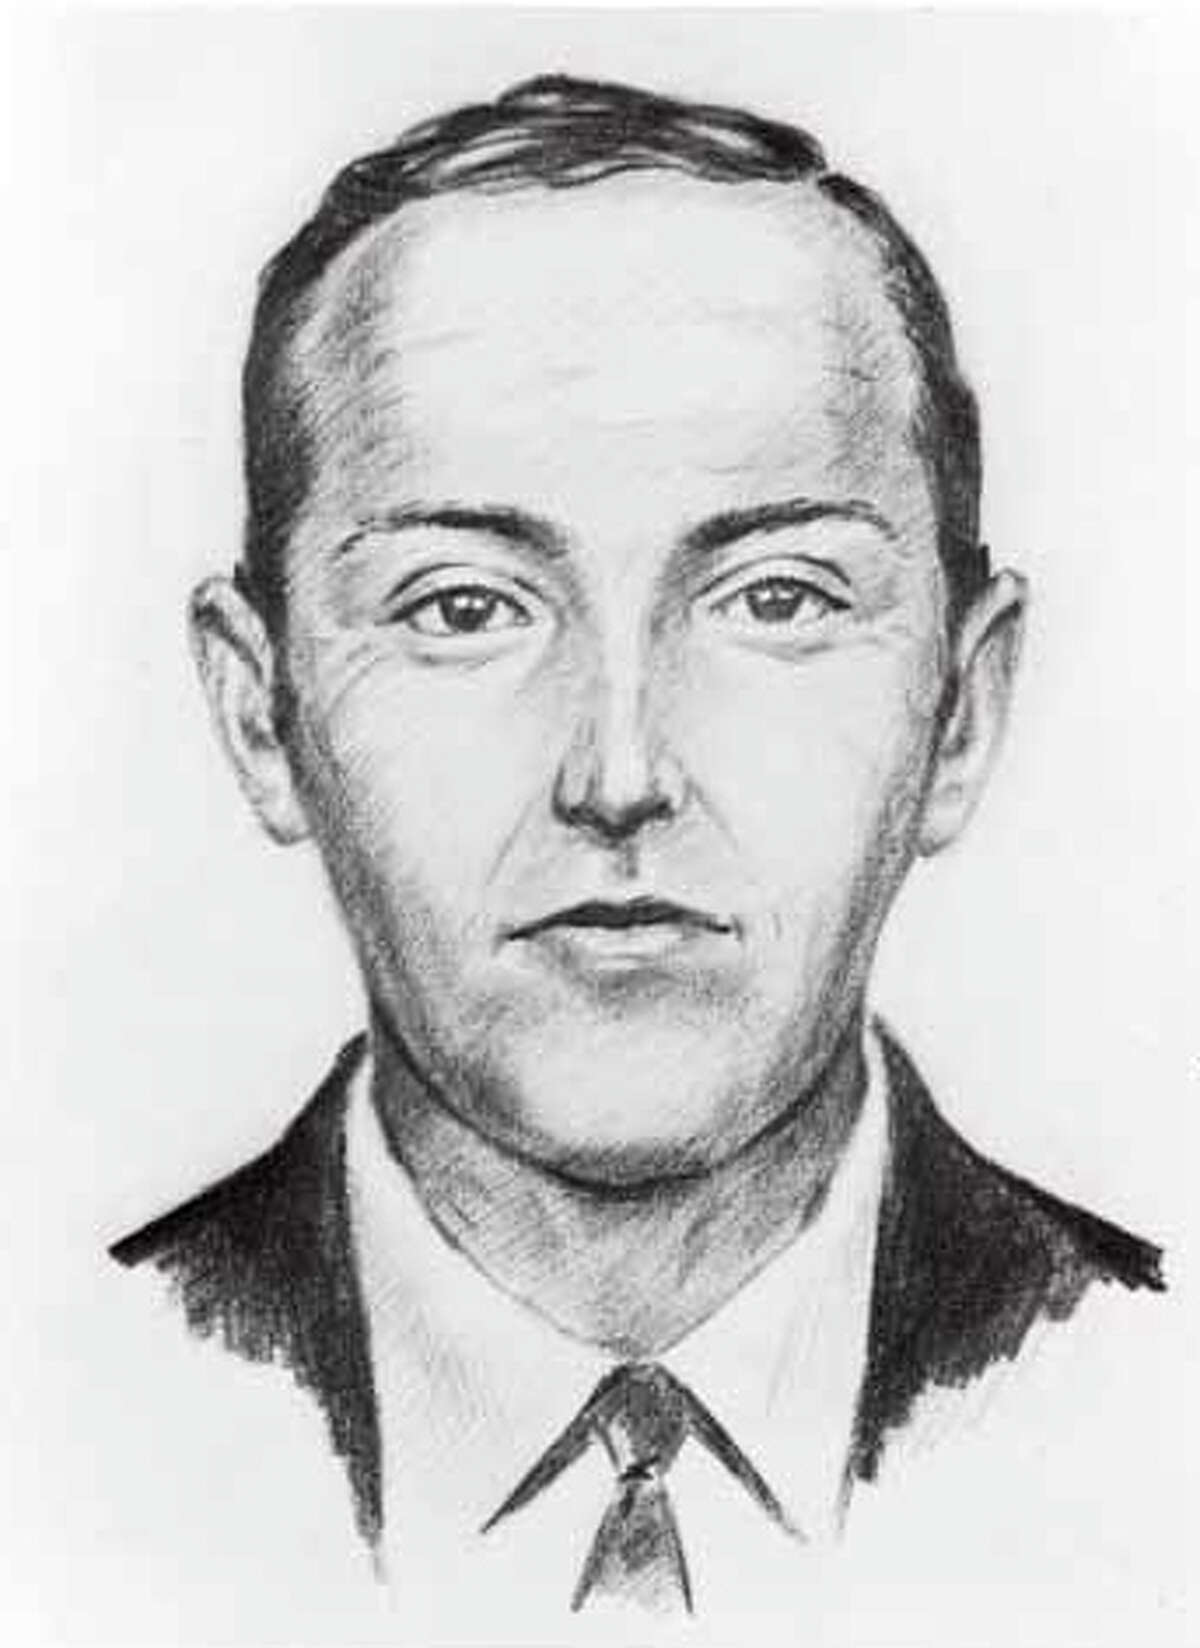 New Investigation Claims Db Cooper Is A Scotts Valley Native 0520